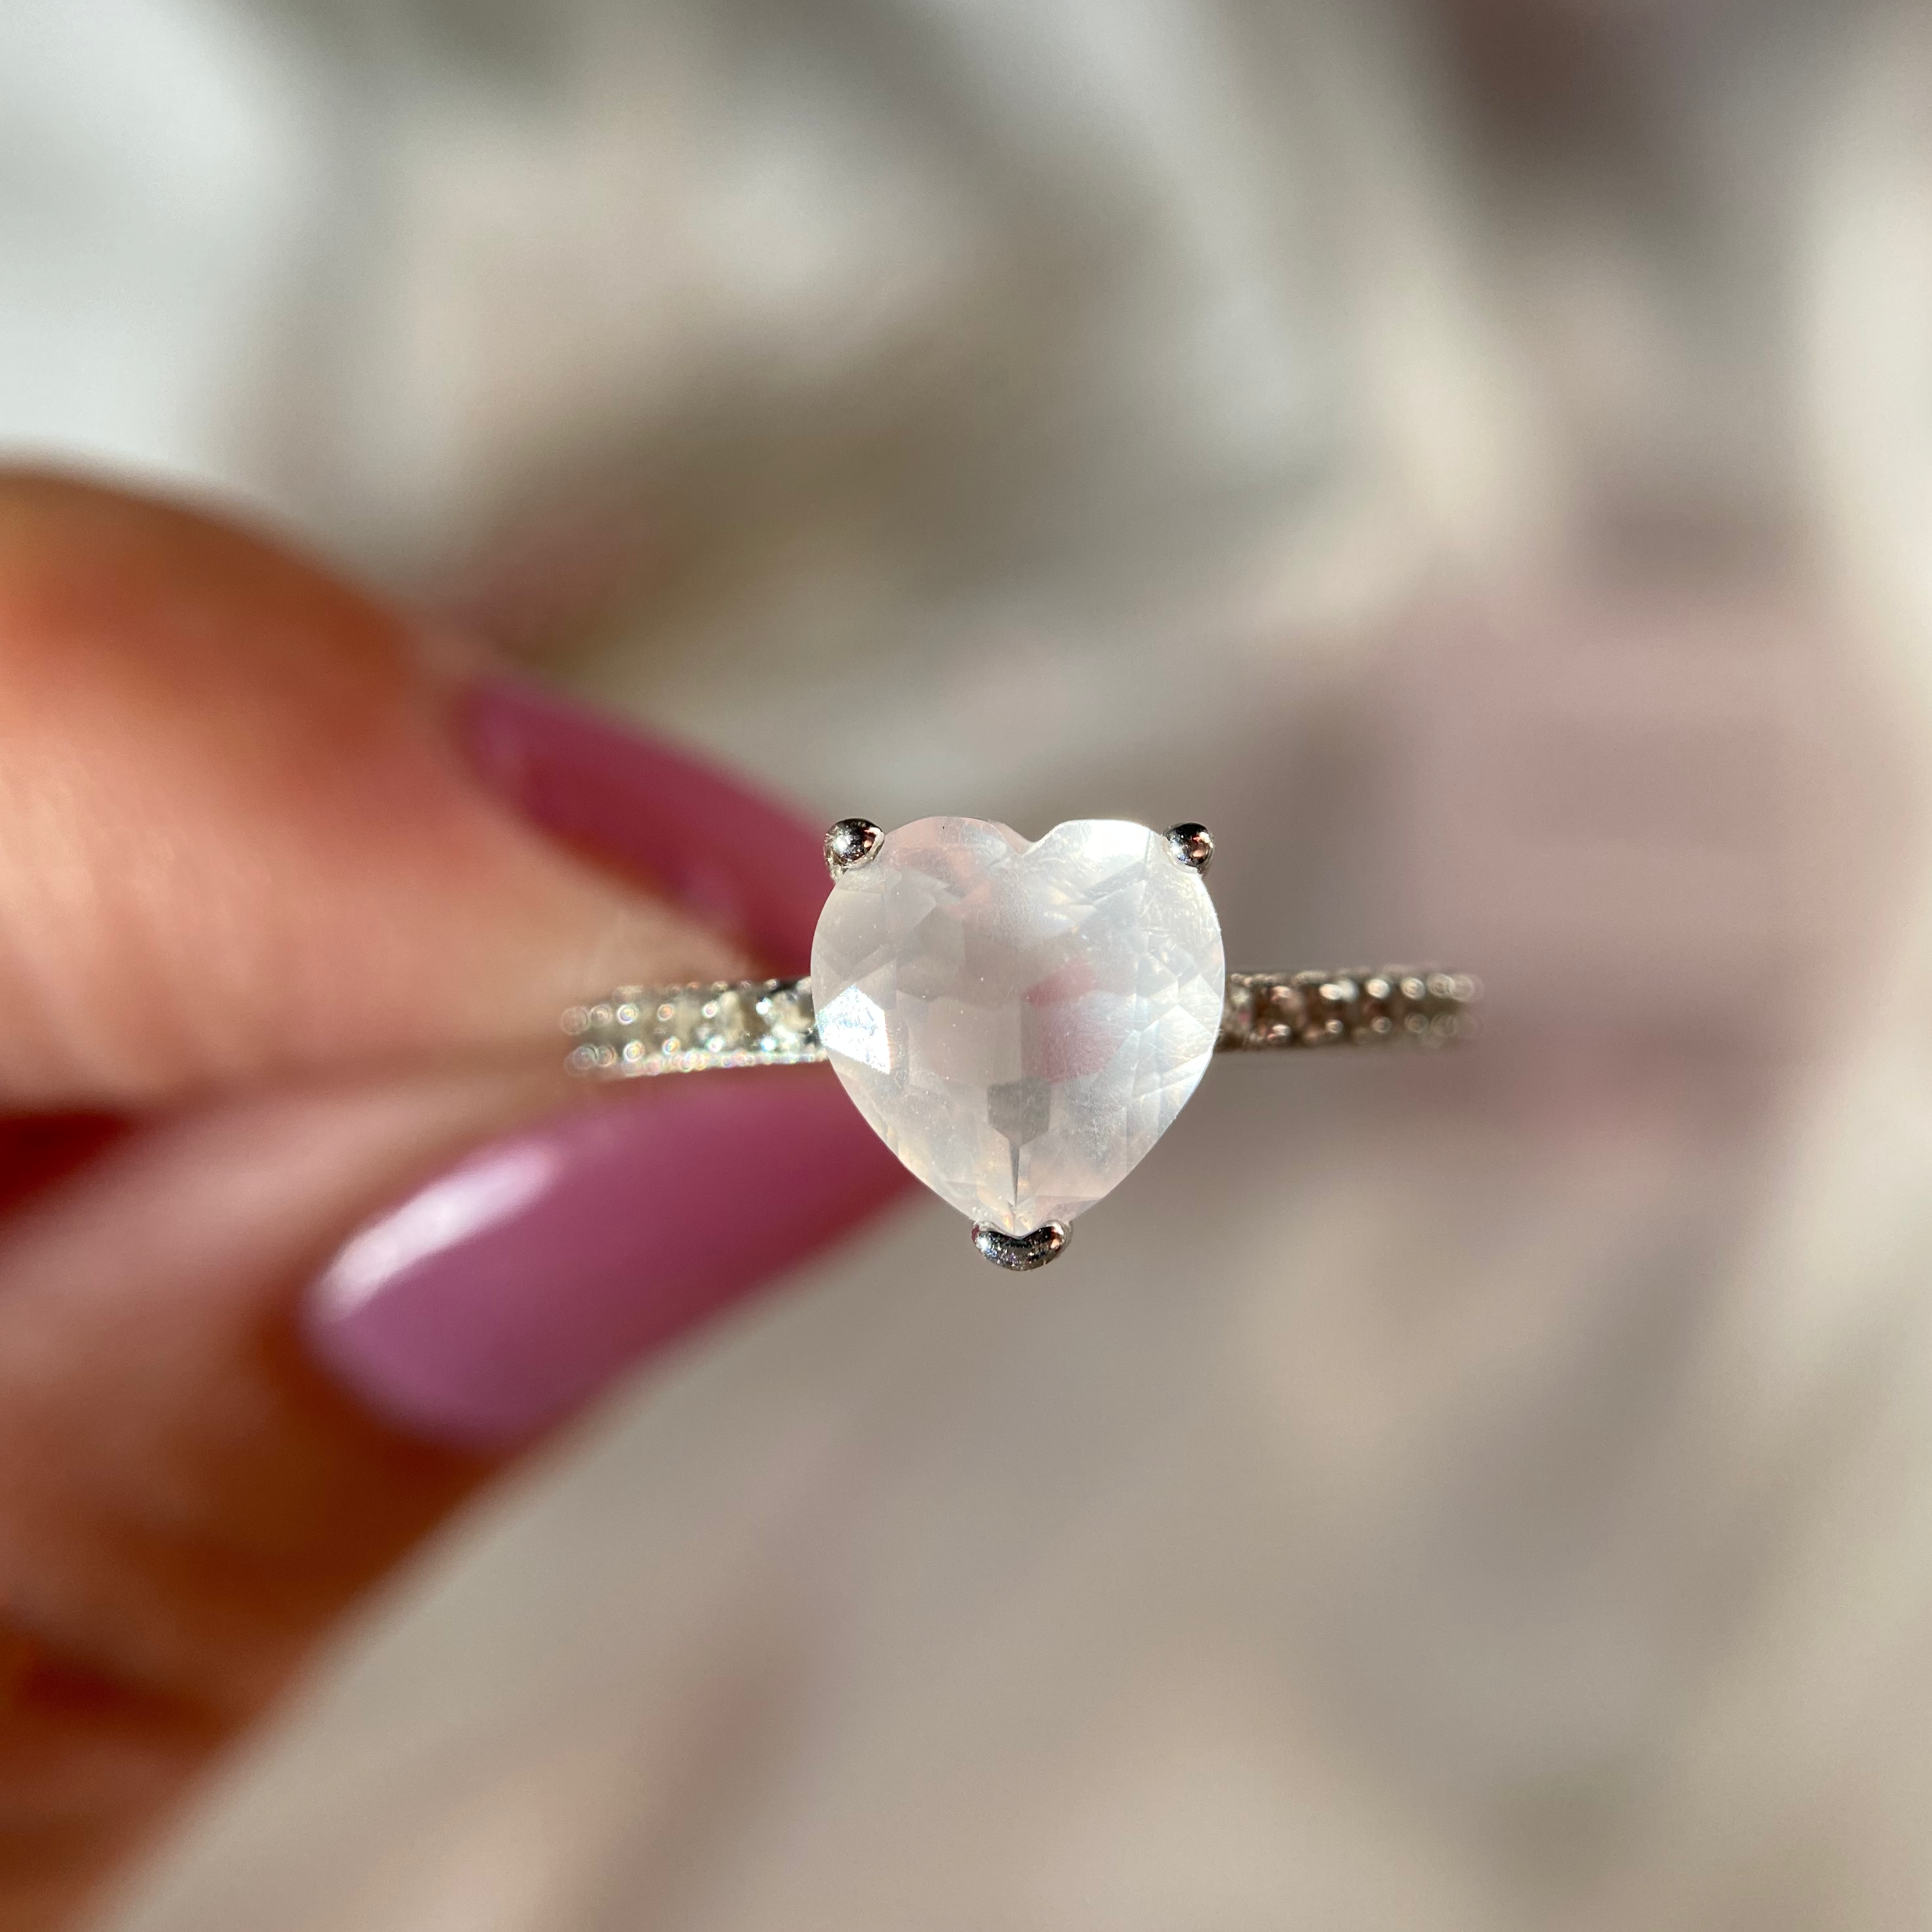 Heart Shaped Engagement Rings: Explore 1ct, 2ct, 3ct+